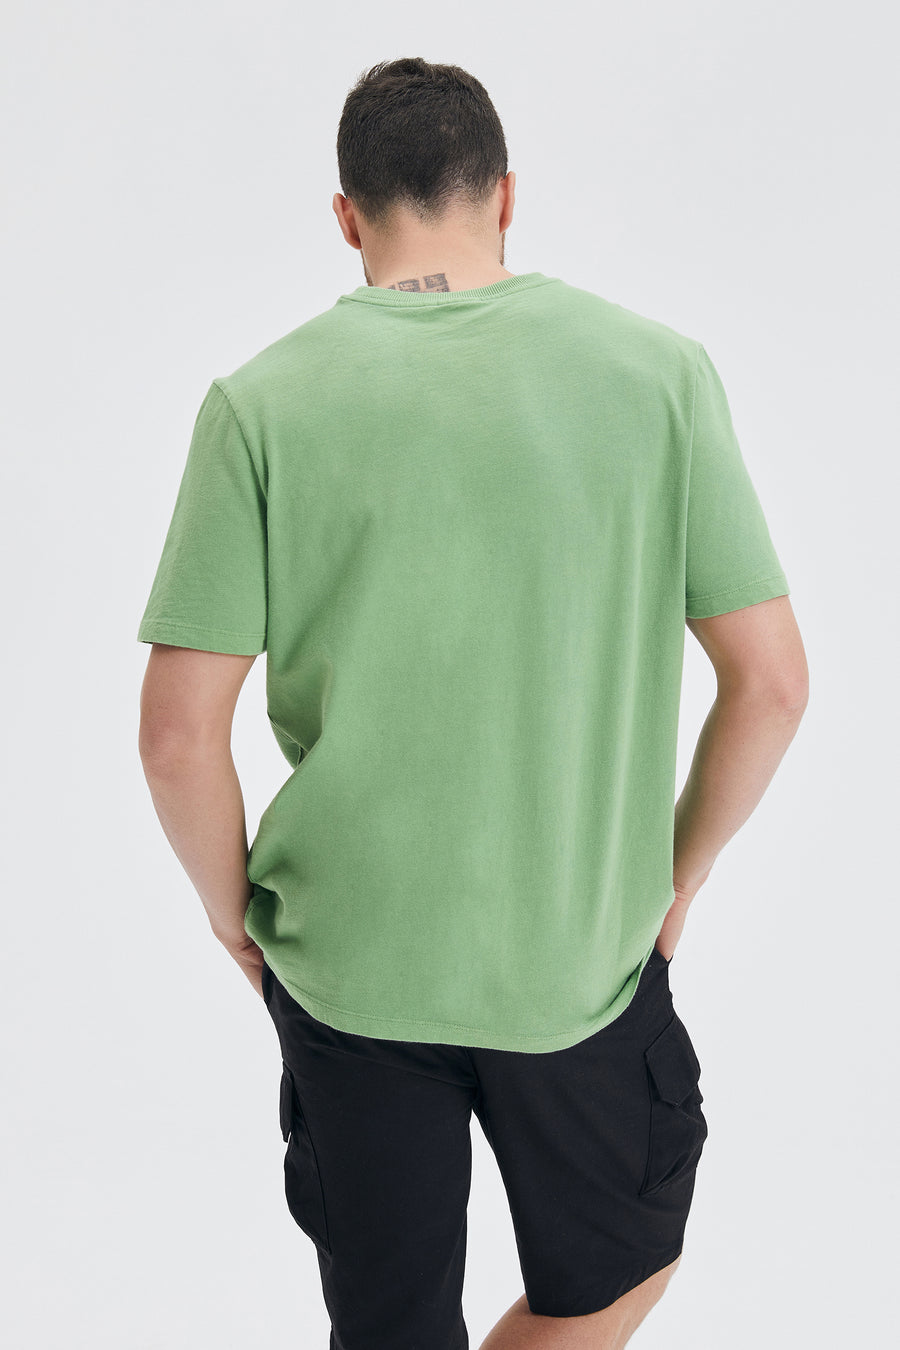 GNP Acid Washed Green Tshirt With Pocket Detail